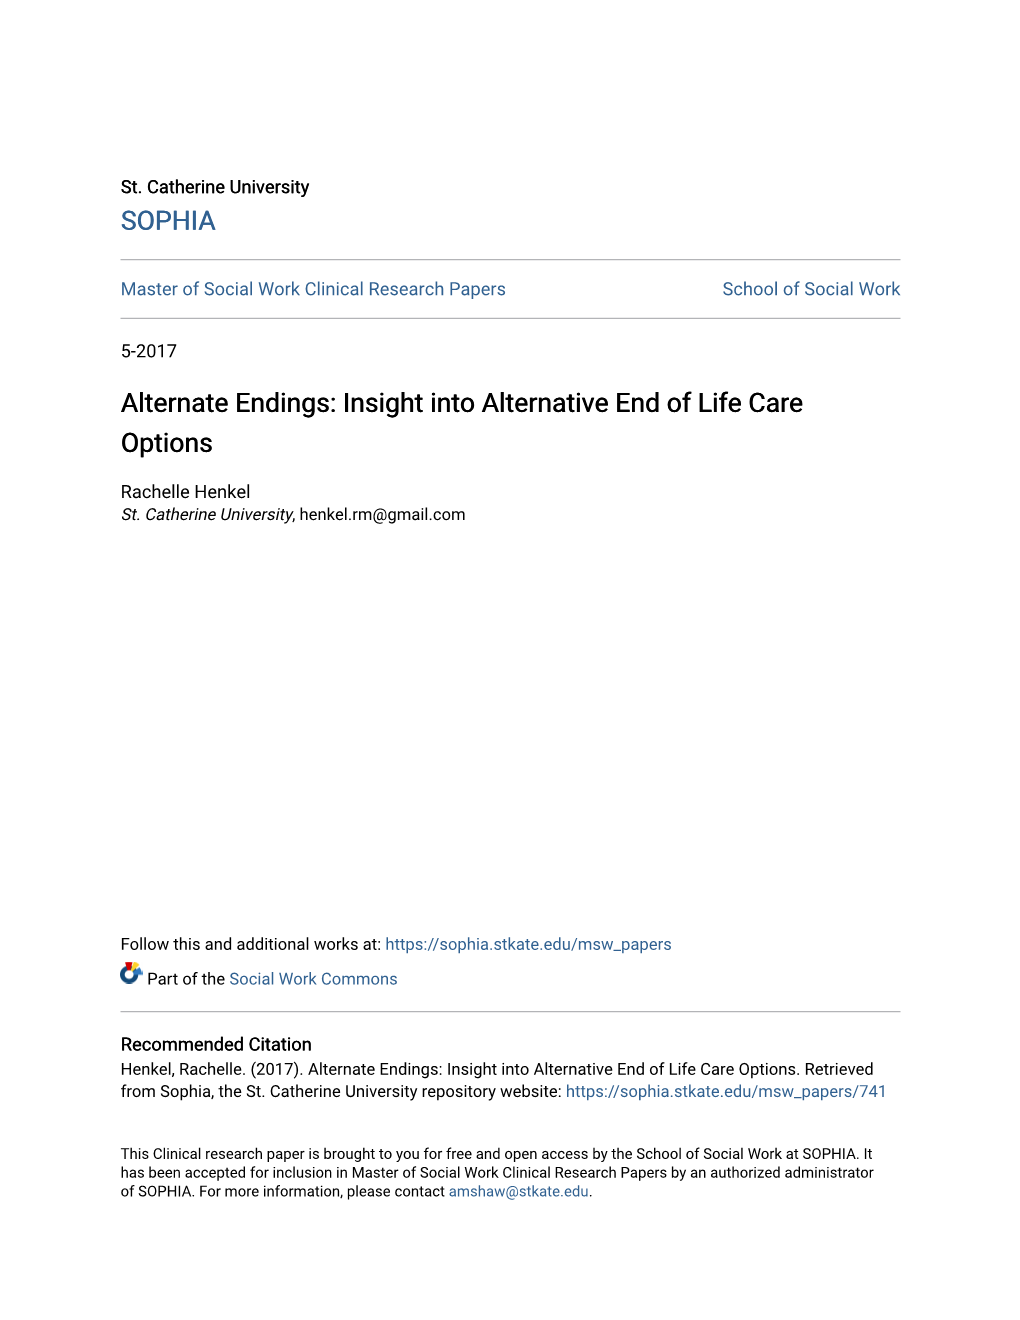 Alternate Endings: Insight Into Alternative End of Life Care Options